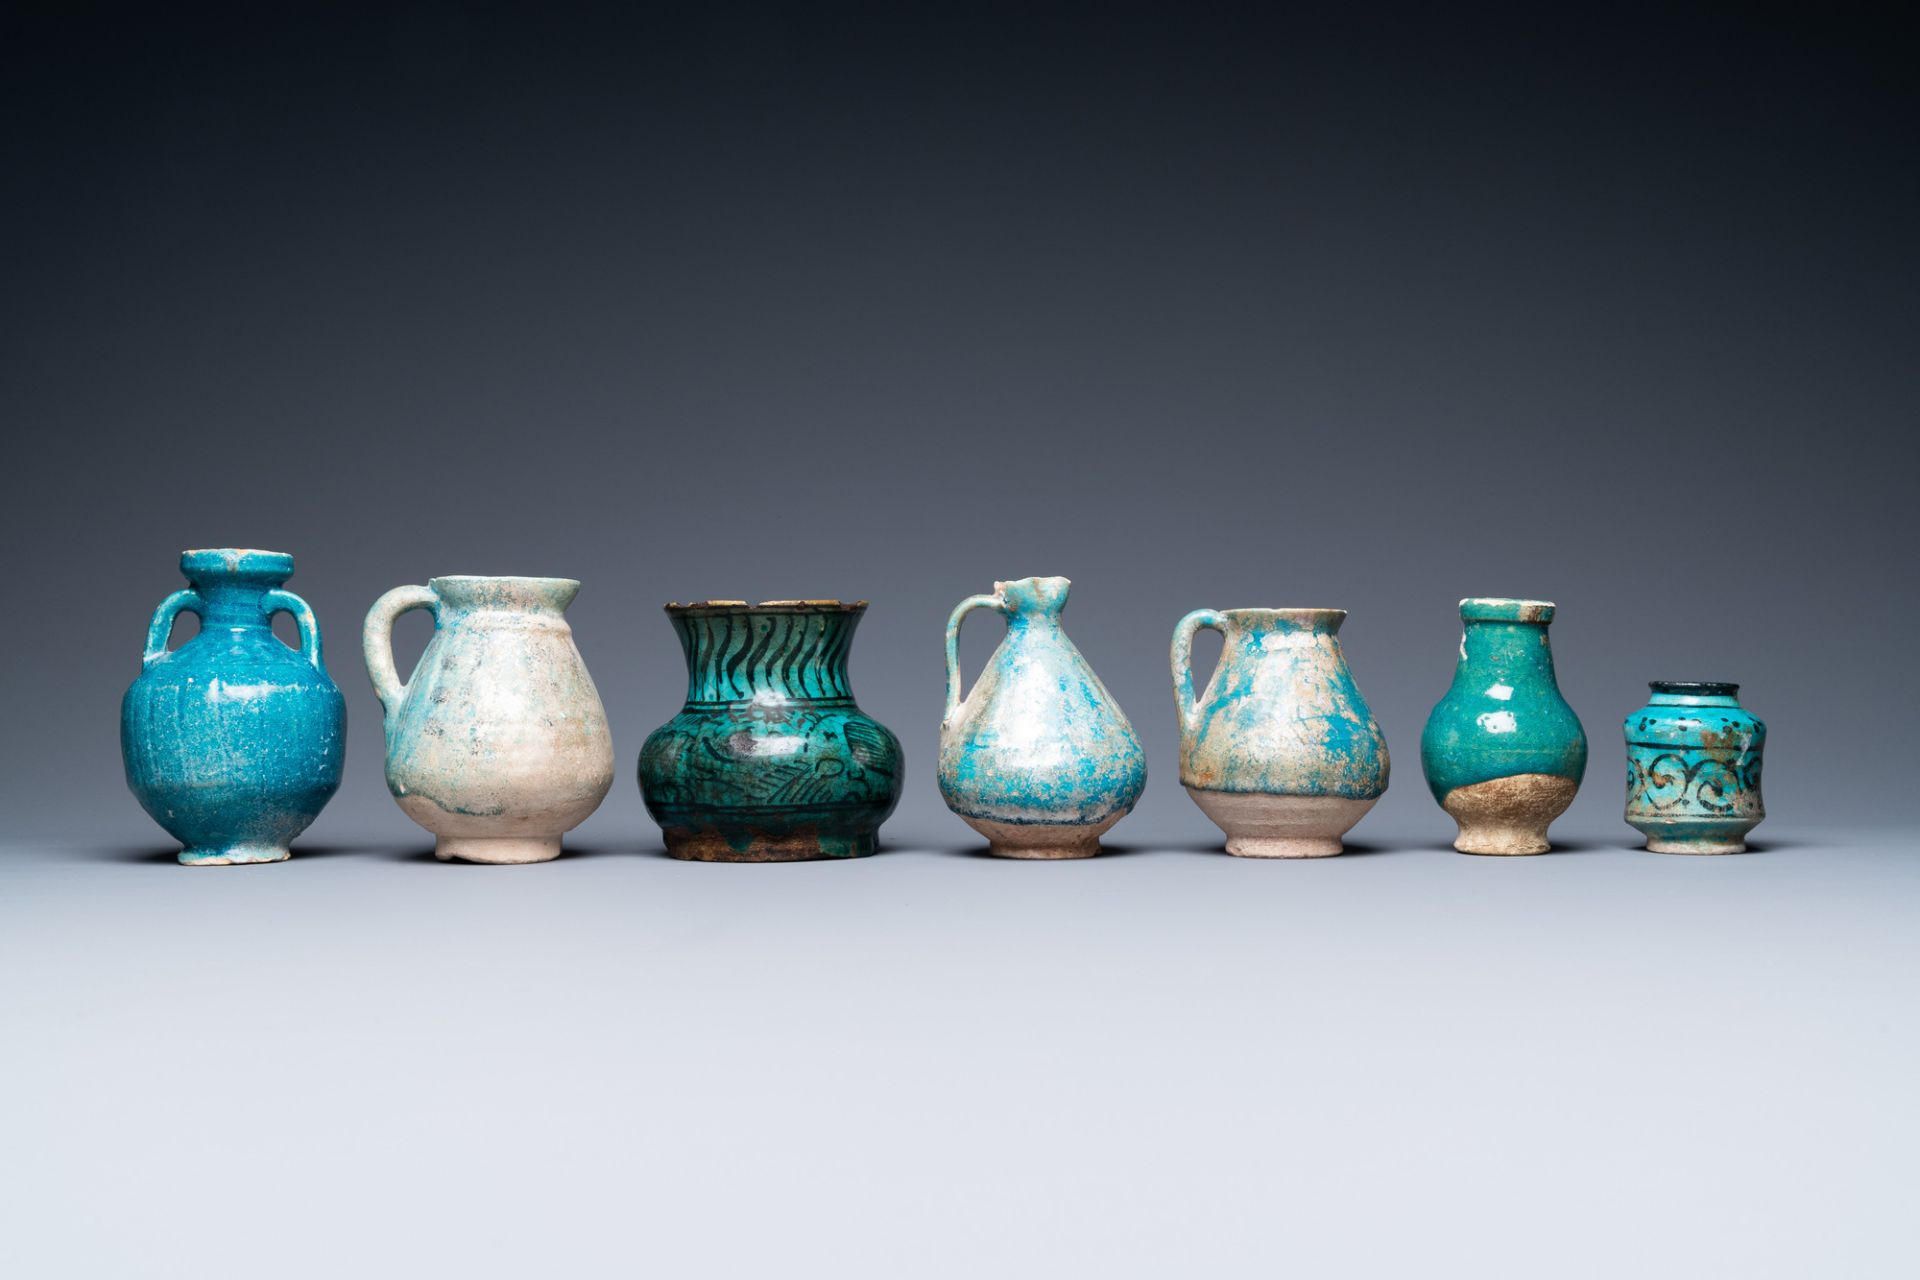 A collection of seven turquoise-glazed jugs and vases, Middle-East, 13th C. and later - Image 4 of 7